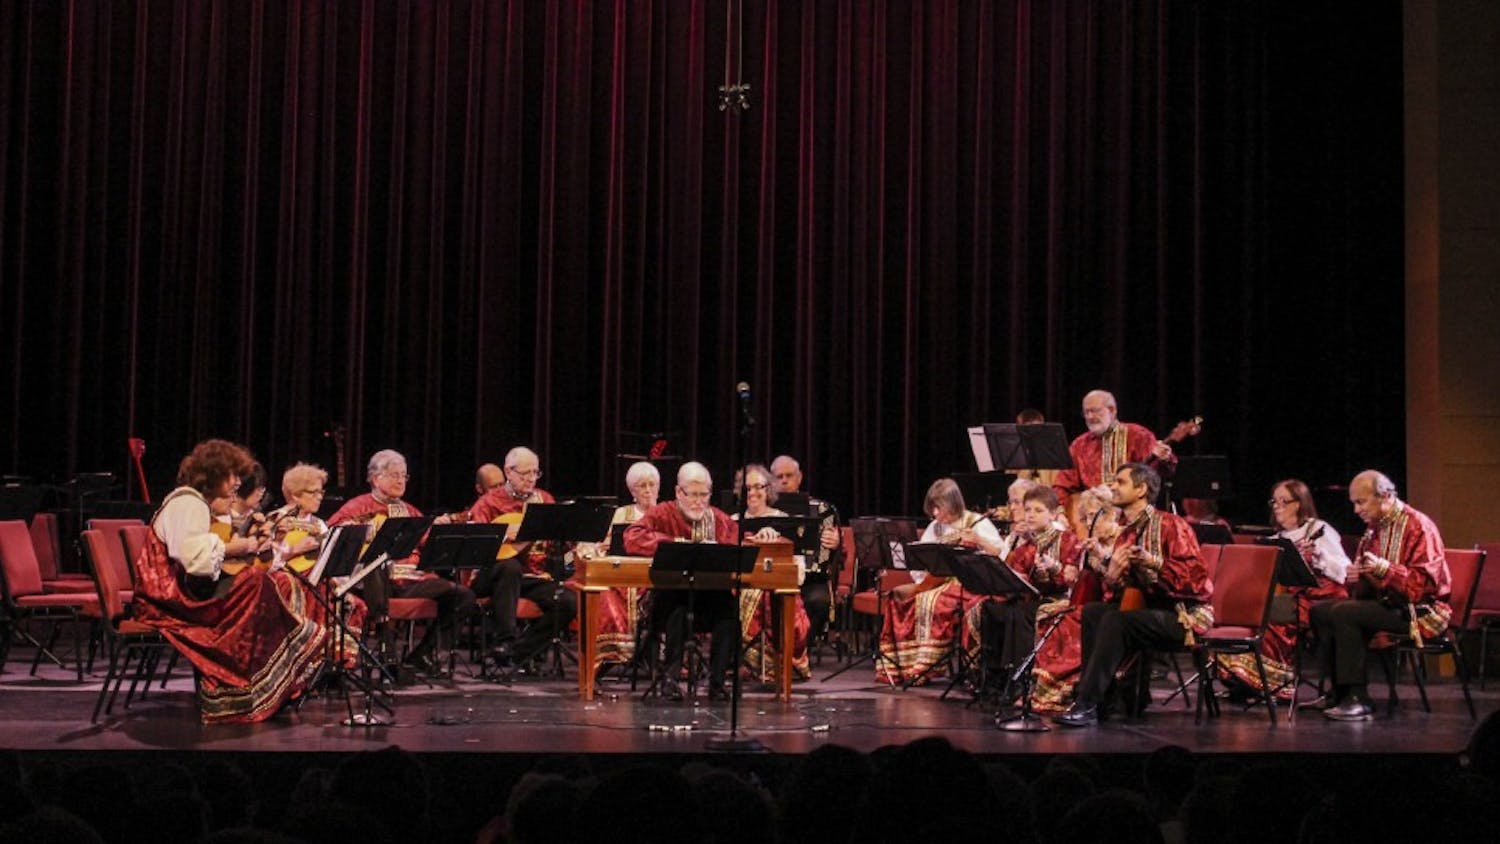 Musicians perform Saturday night at the Buskird Chumley theater during the Russian Festival Concert. The performers are from Russia, Europe and North America. 